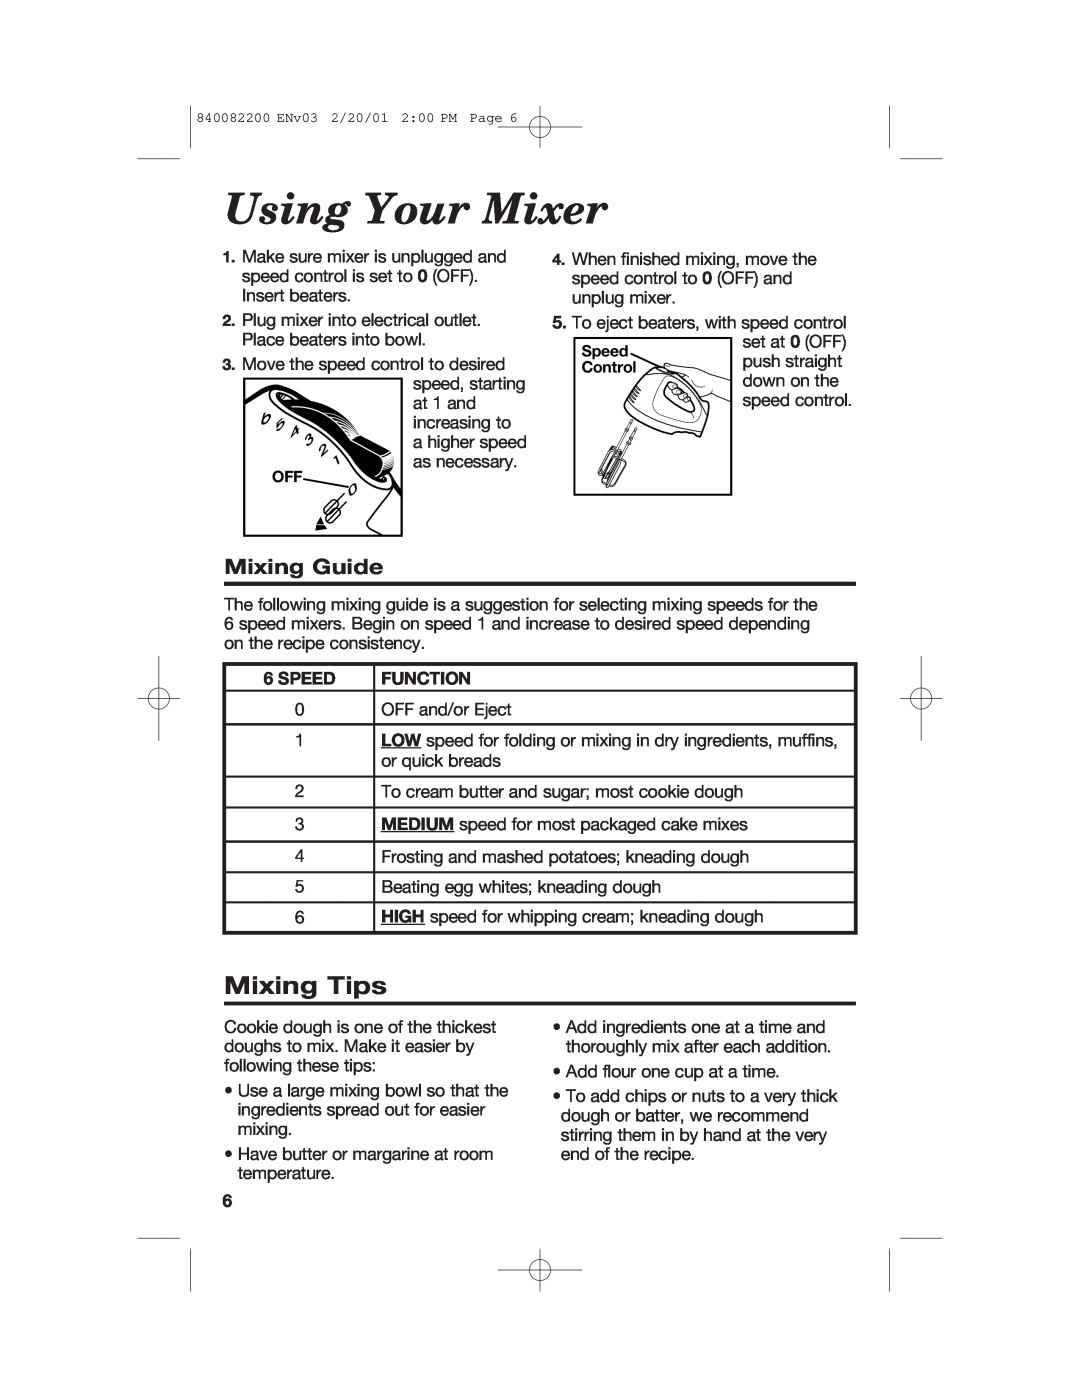 Hamilton Beach 62695RC manual Using Your Mixer, Mixing Tips, Mixing Guide, Speed, Function 